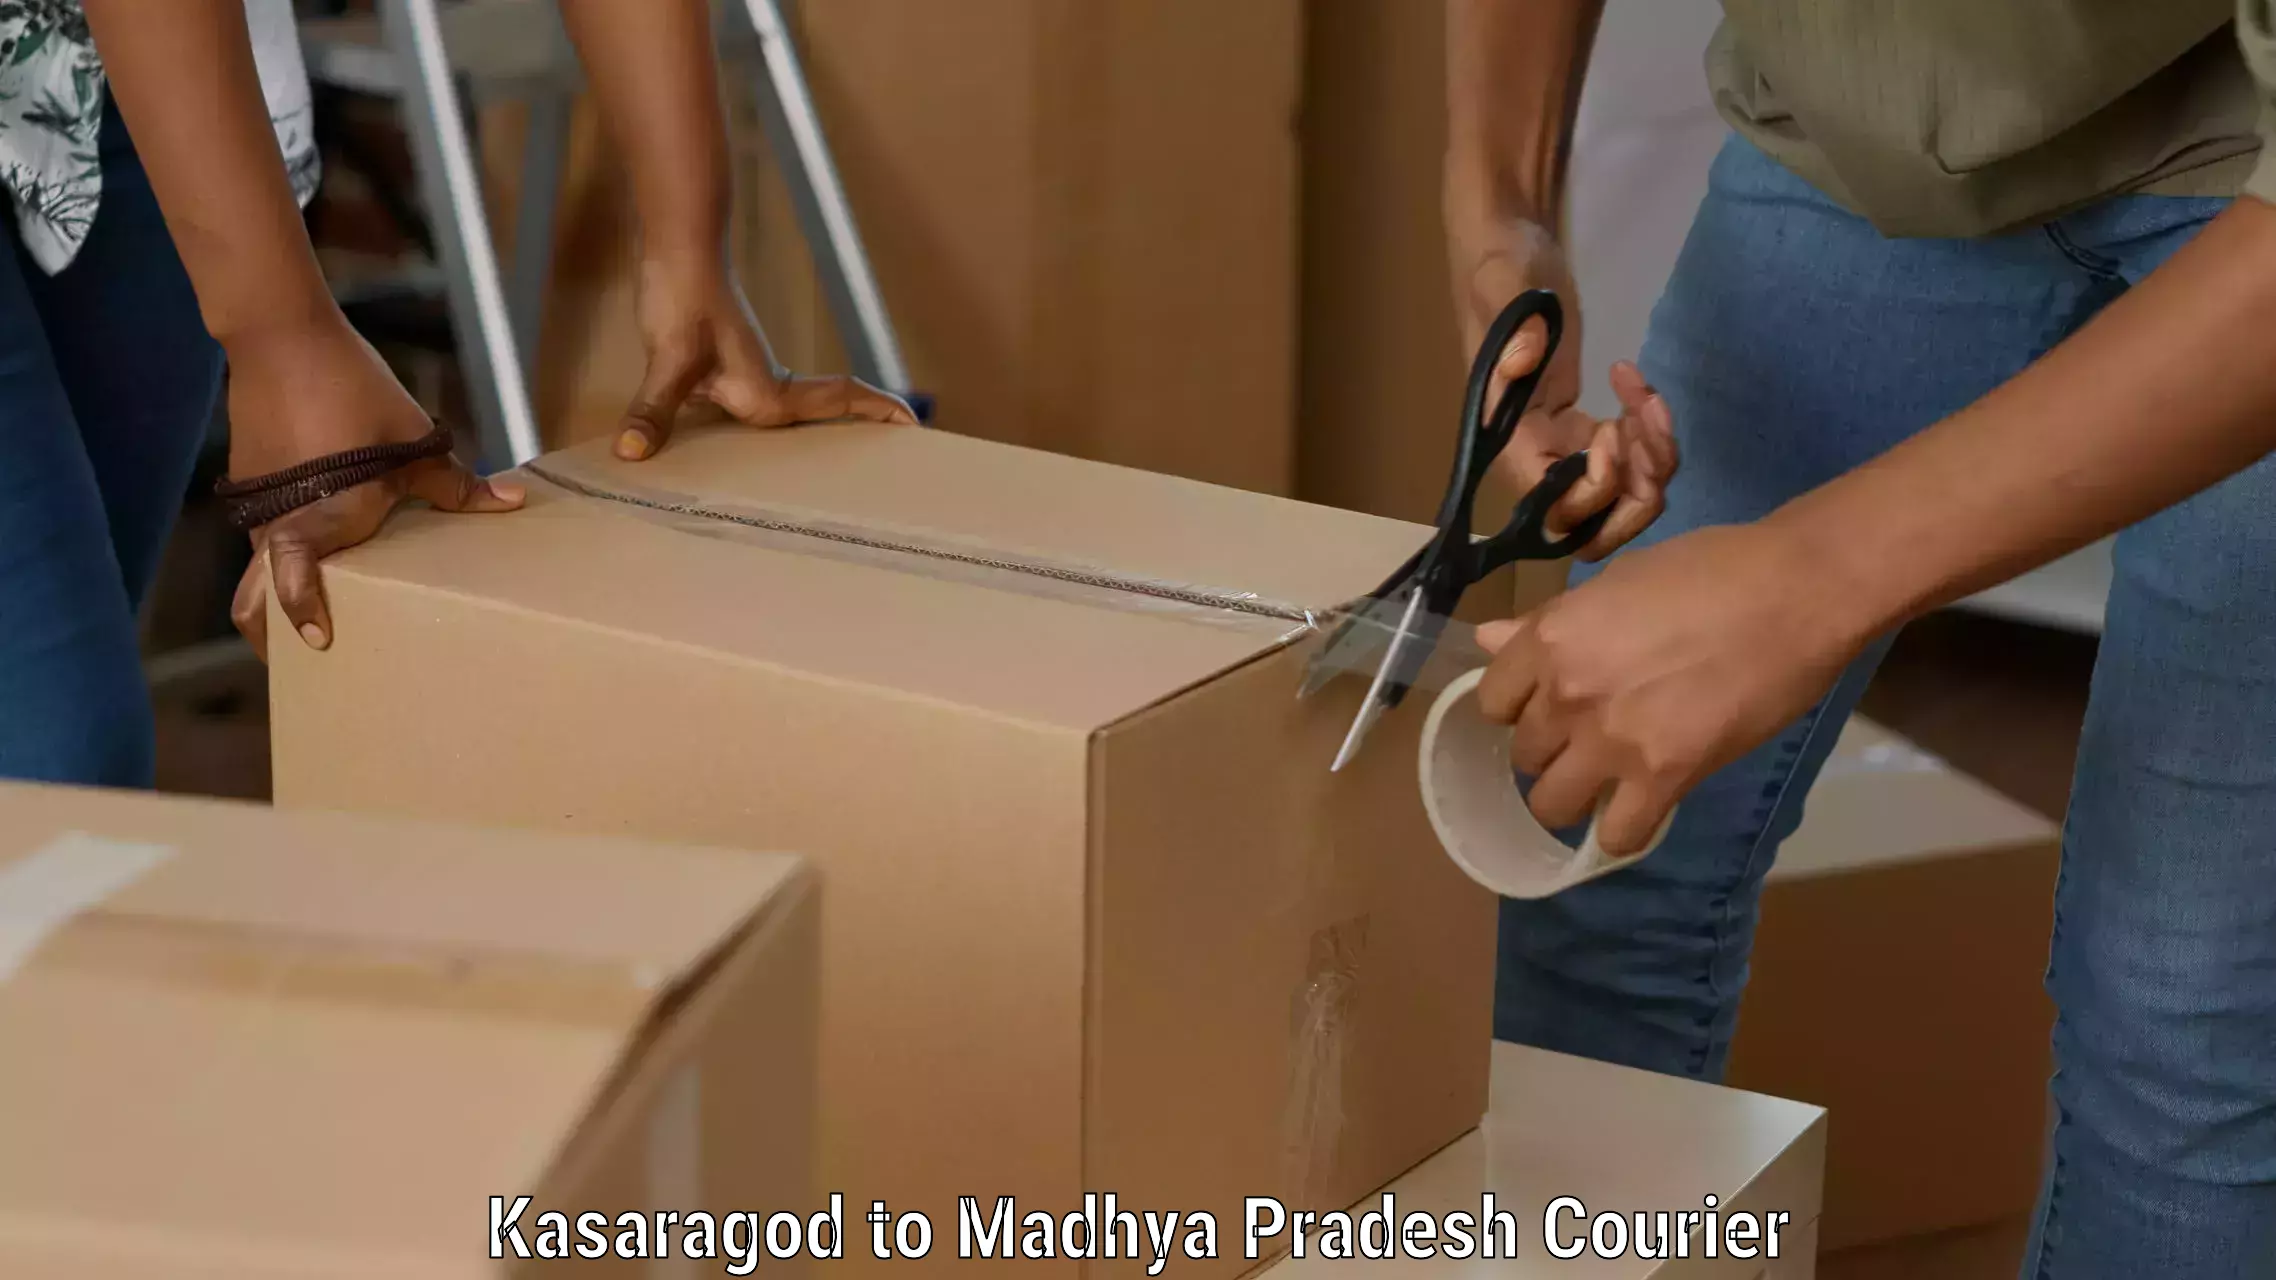 Personalized courier experiences Kasaragod to Depalpur